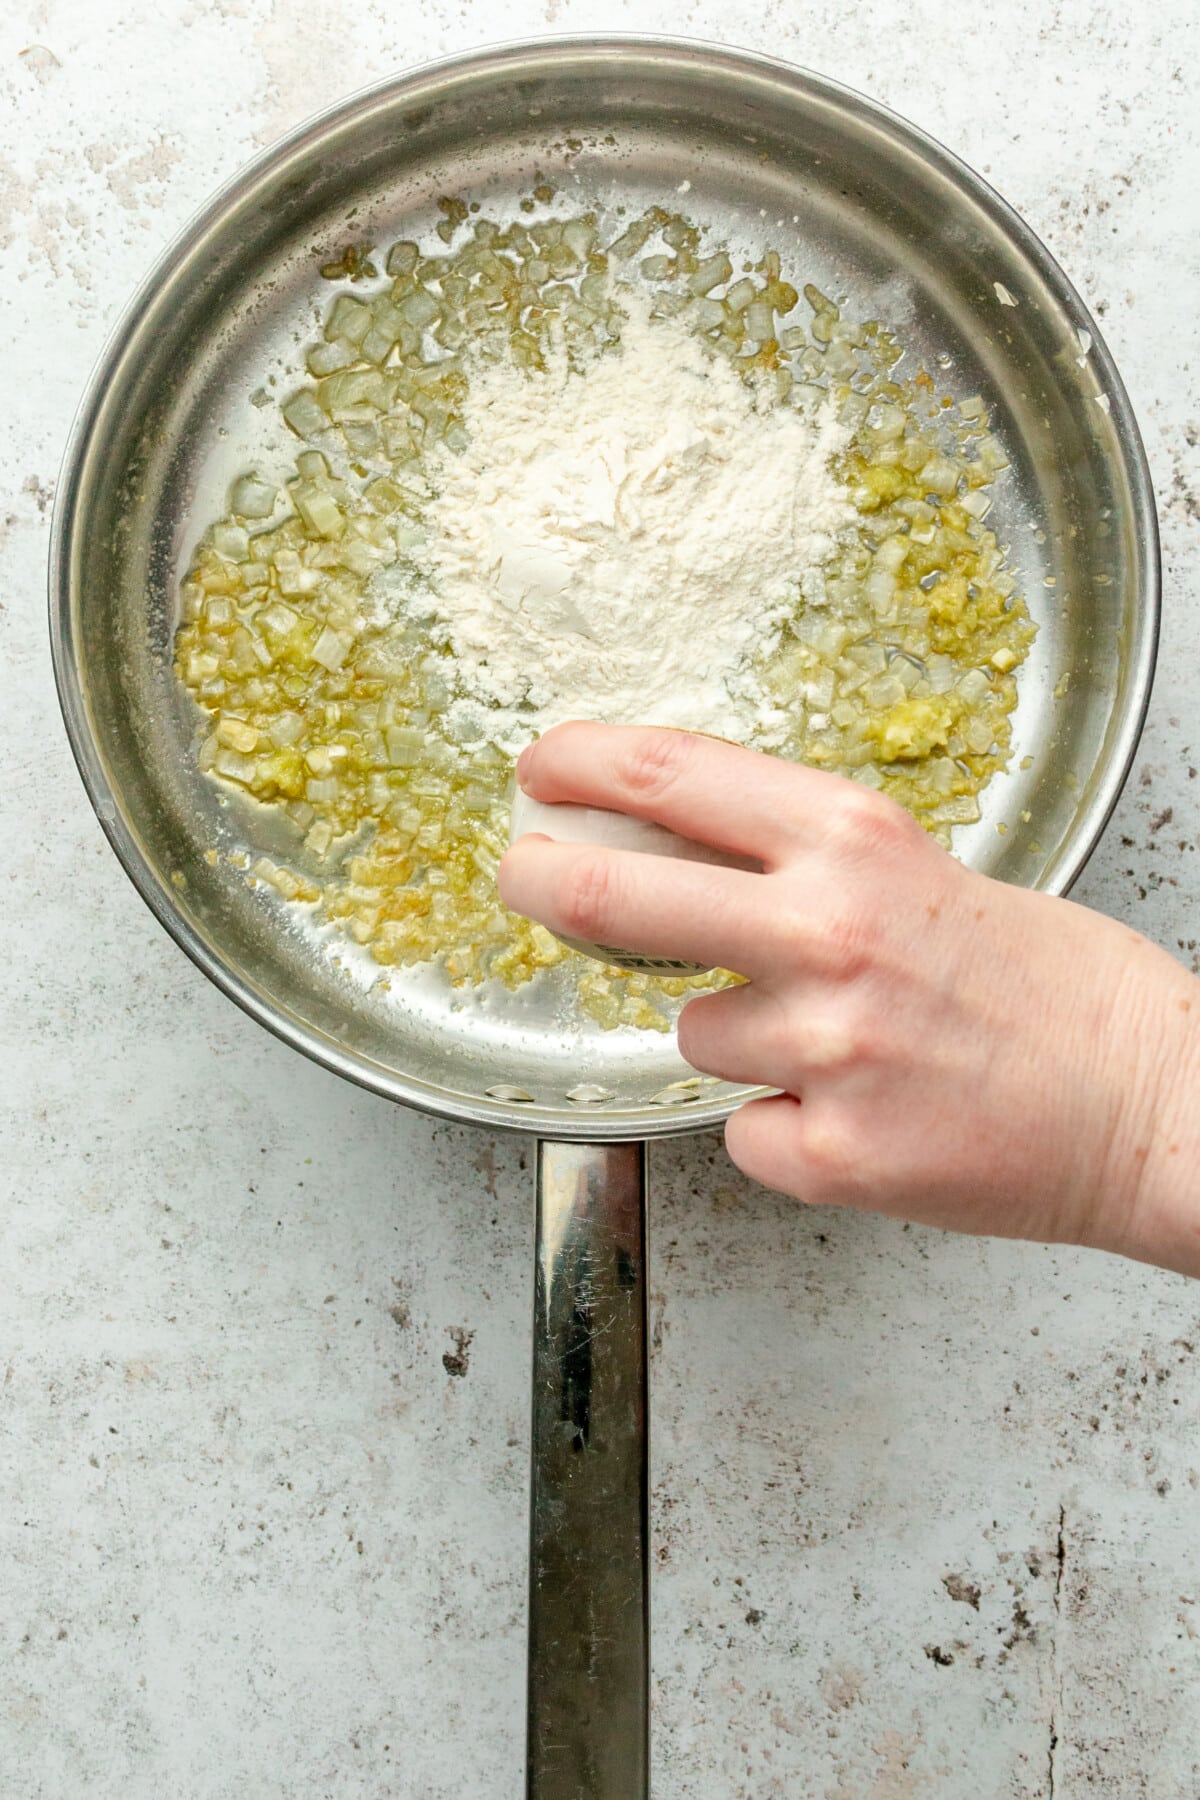 Flour is tossed over melted butter and translucent cubed onion in a stainless steel saucepan on a light grey surface.